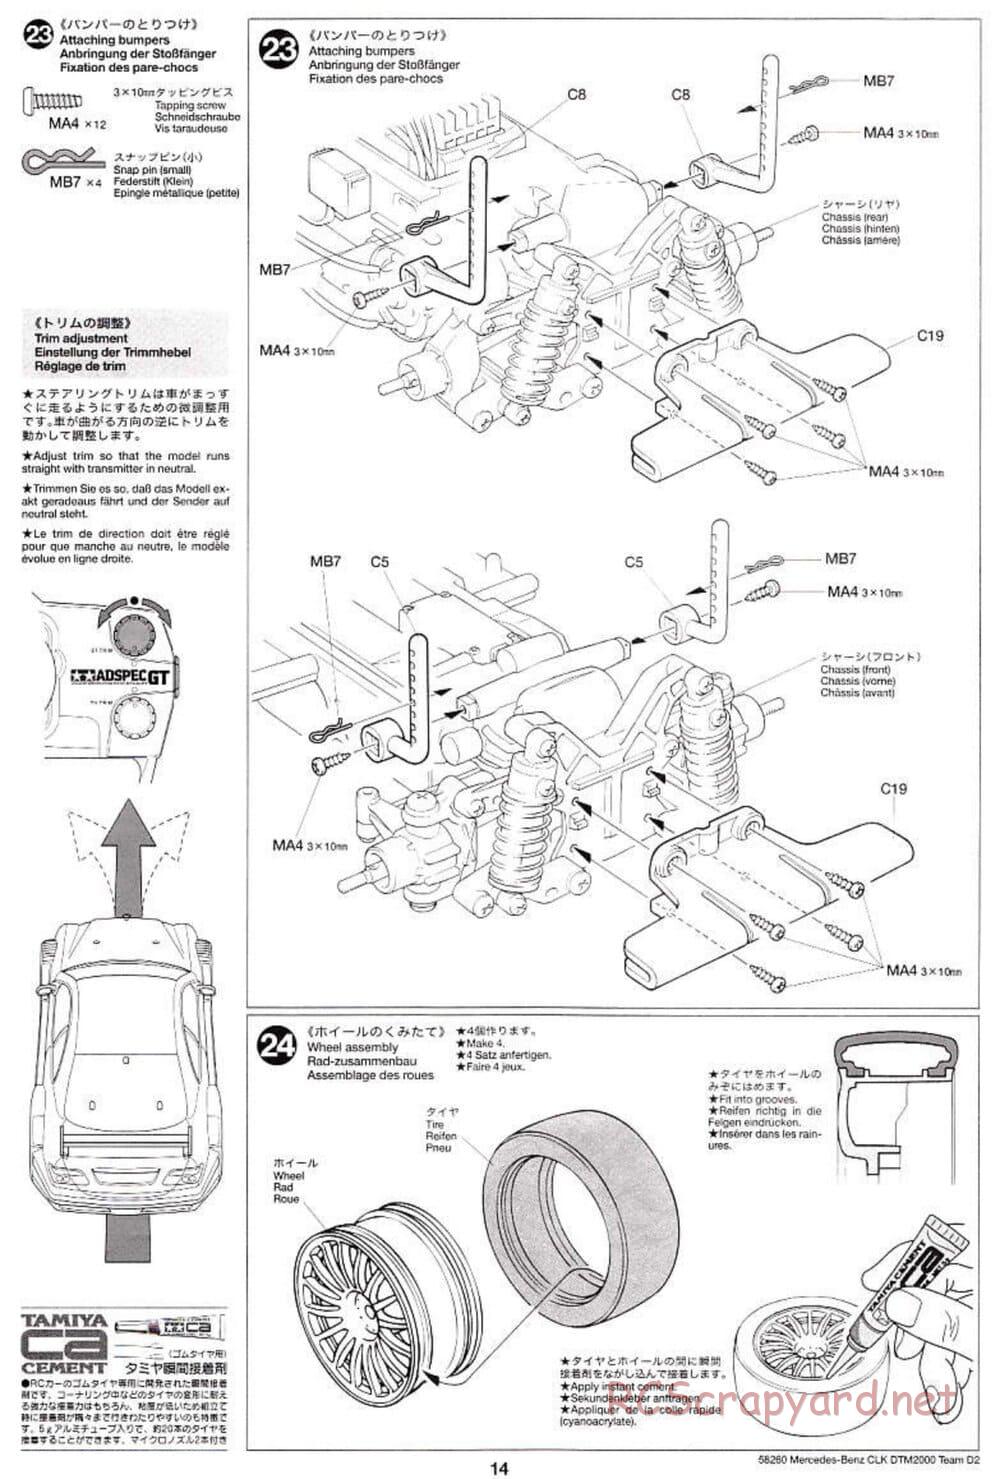 Tamiya - Mercedes Benz CLK DTM 2000 Team D2 - TL-01 Chassis - Manual - Page 14